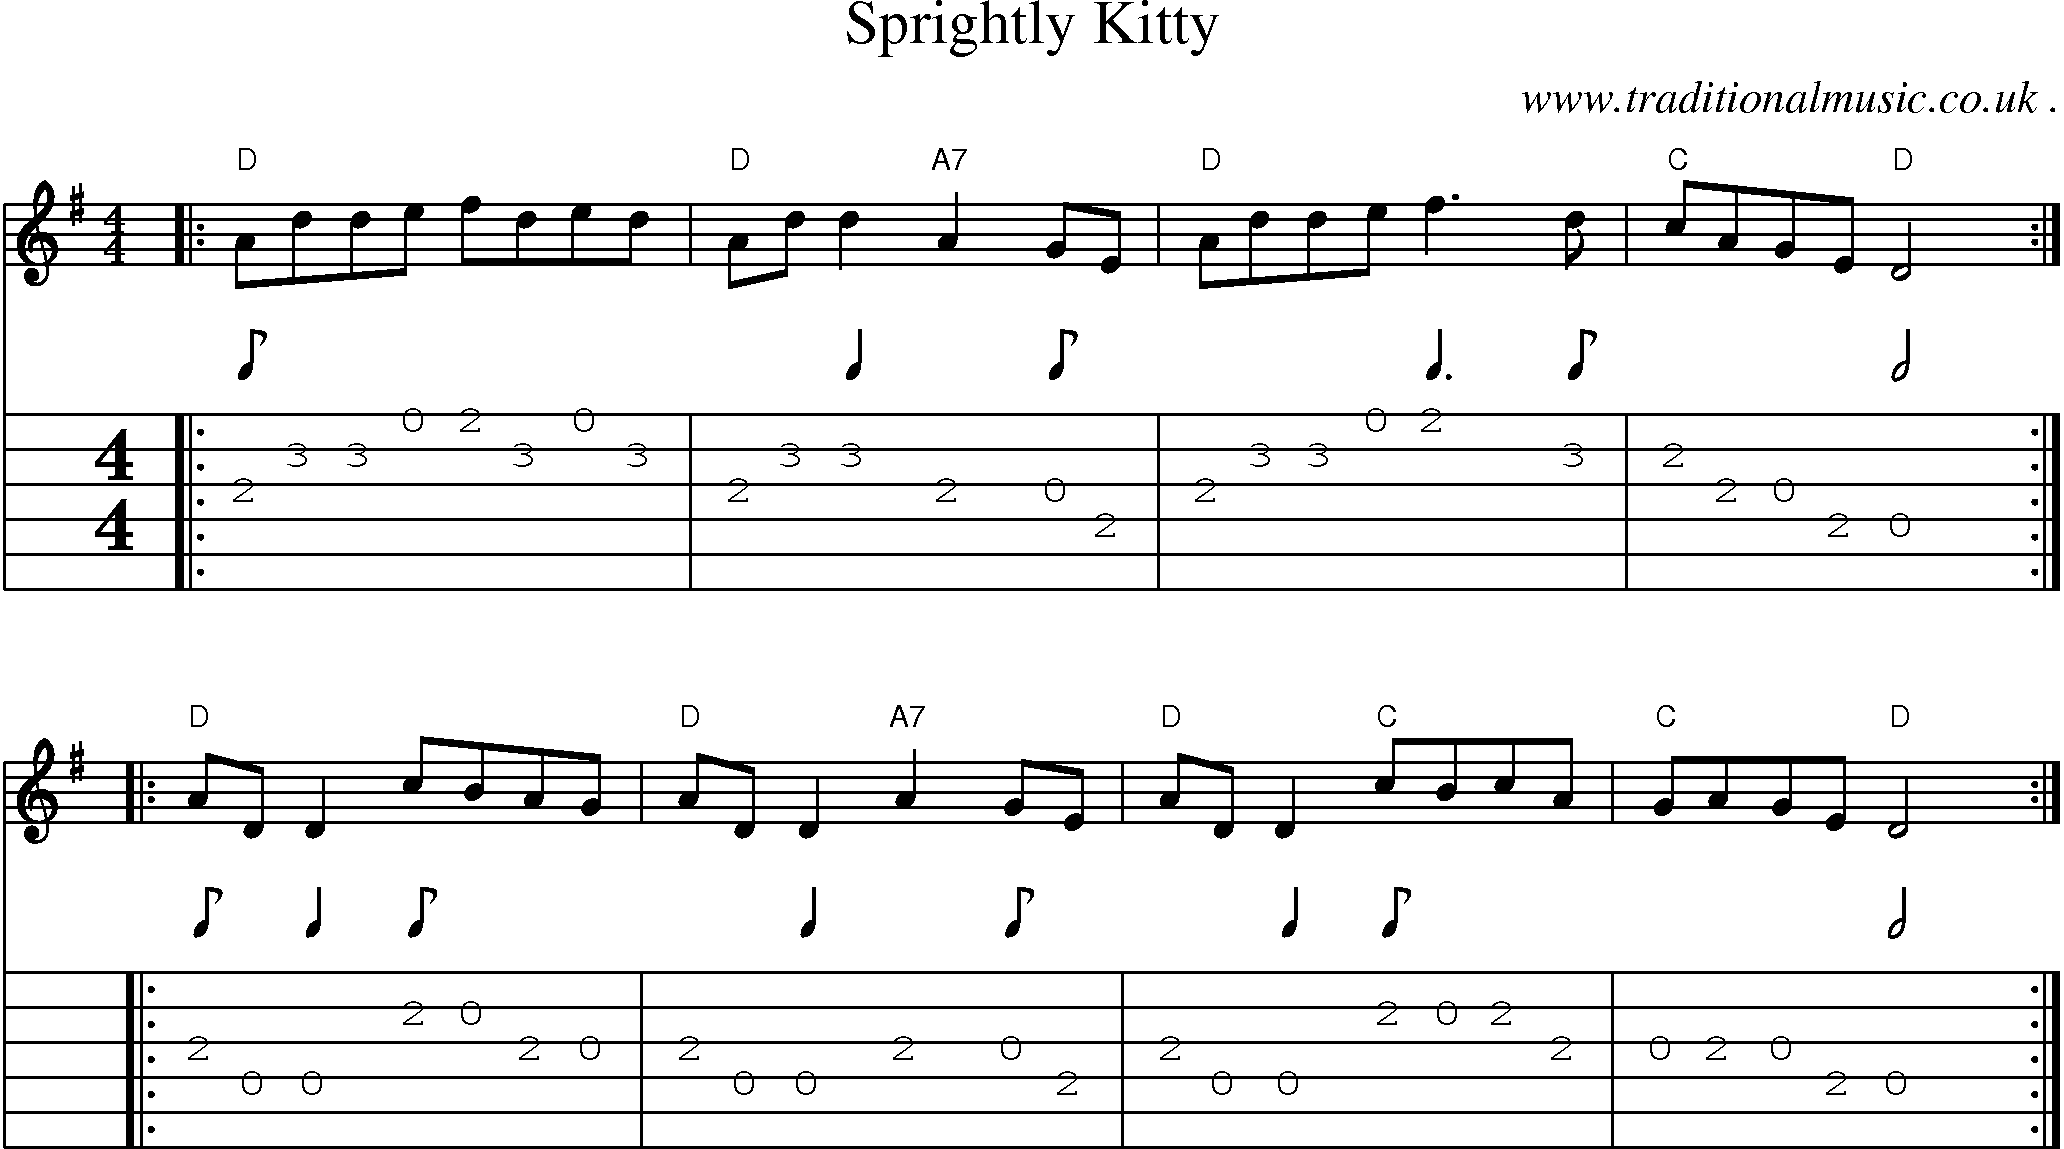 Sheet-music  score, Chords and Guitar Tabs for Sprightly Kitty